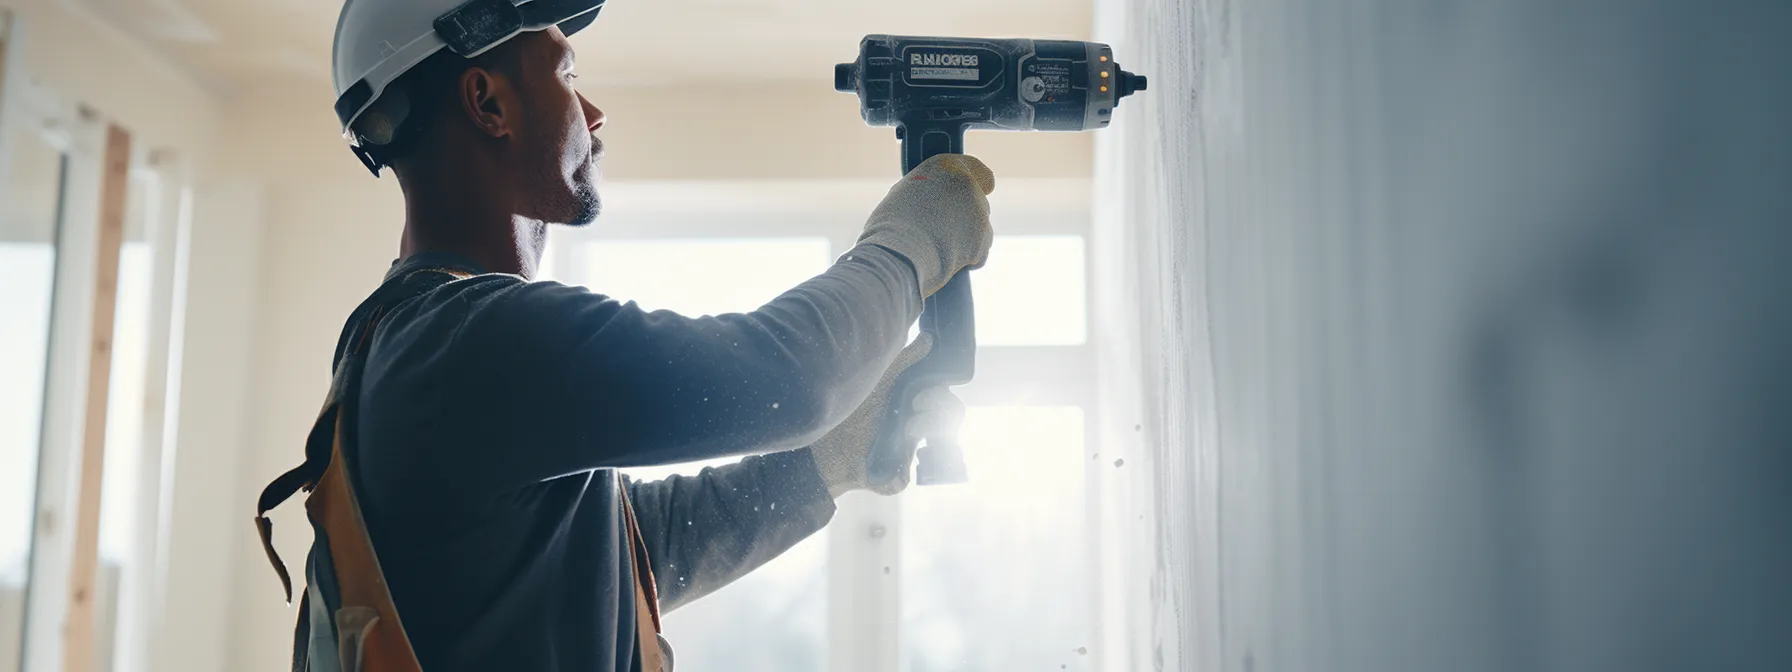 a person using a drill to fasten drywall sheets to a wall.